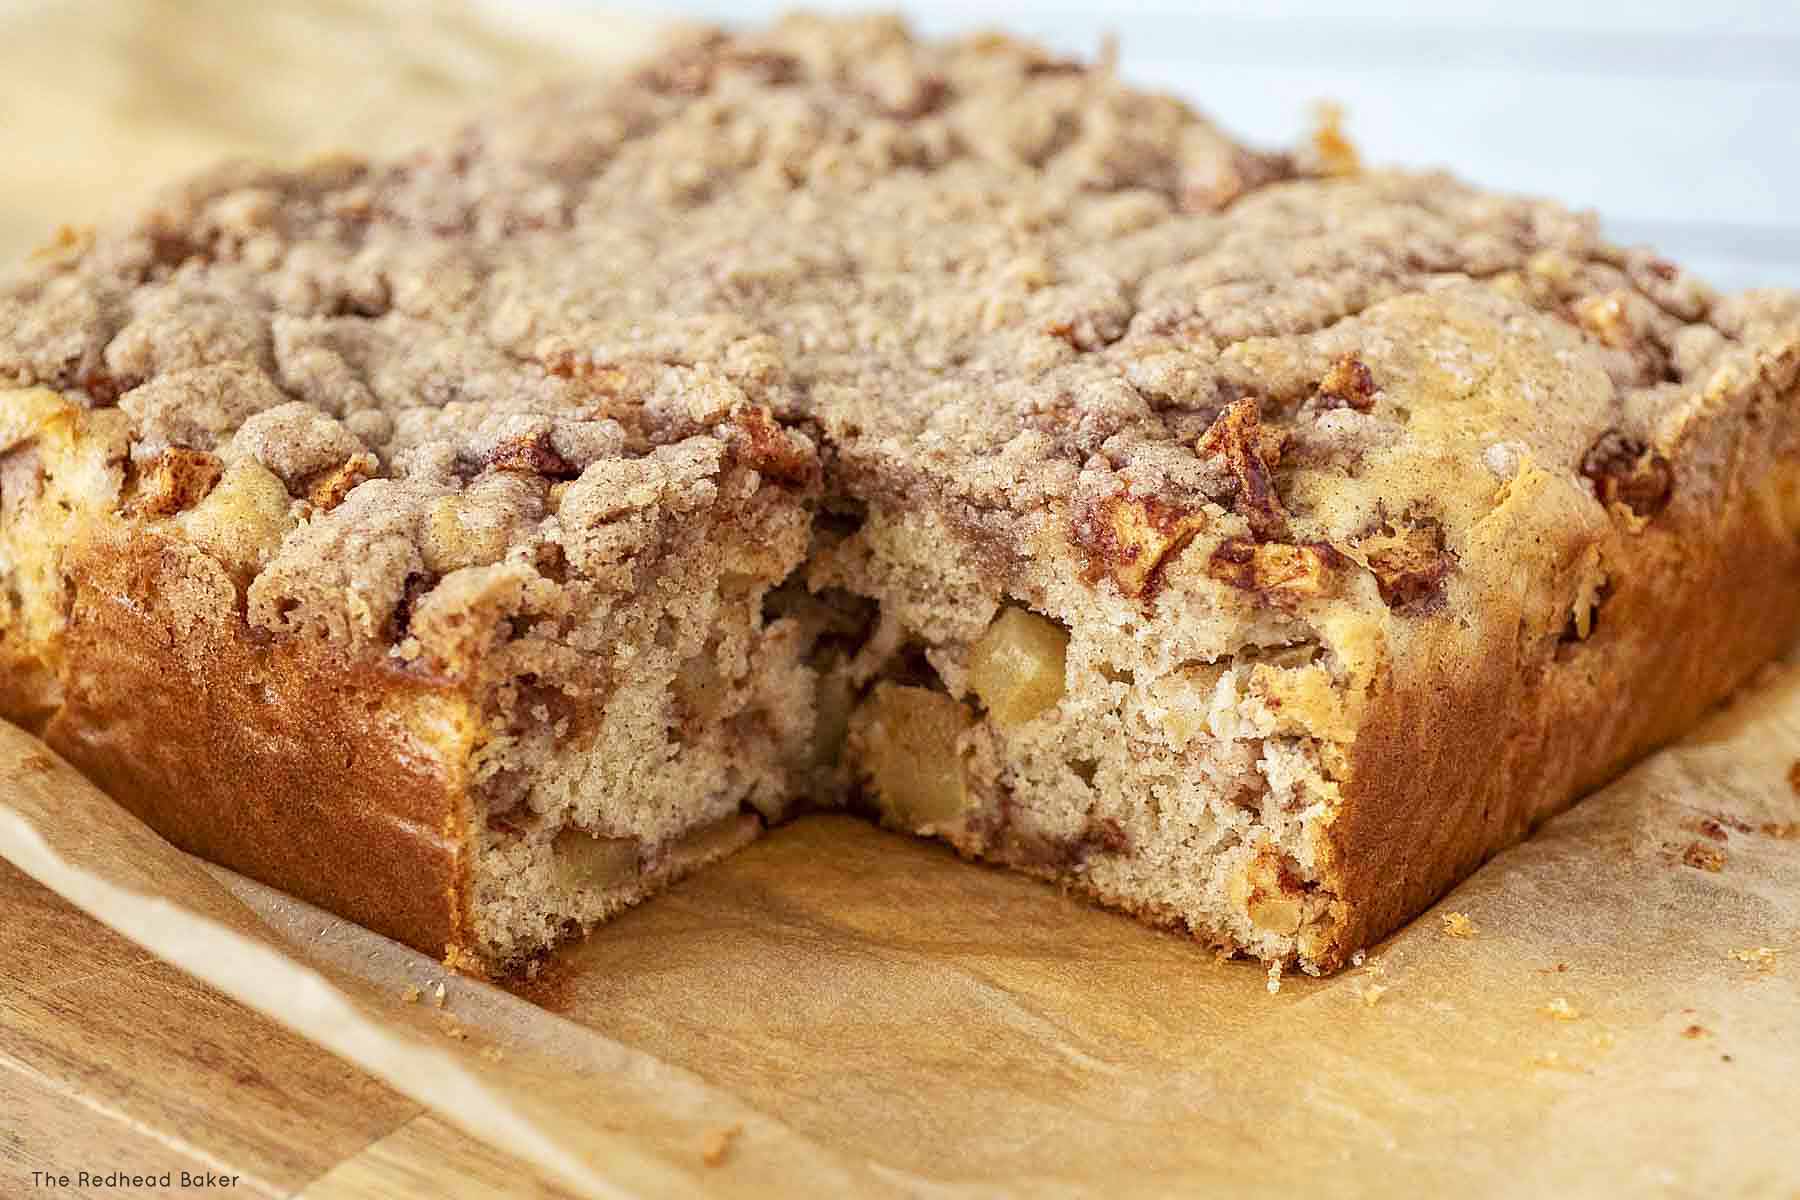 An apple crumb cake on a wooden board with a slice removed.